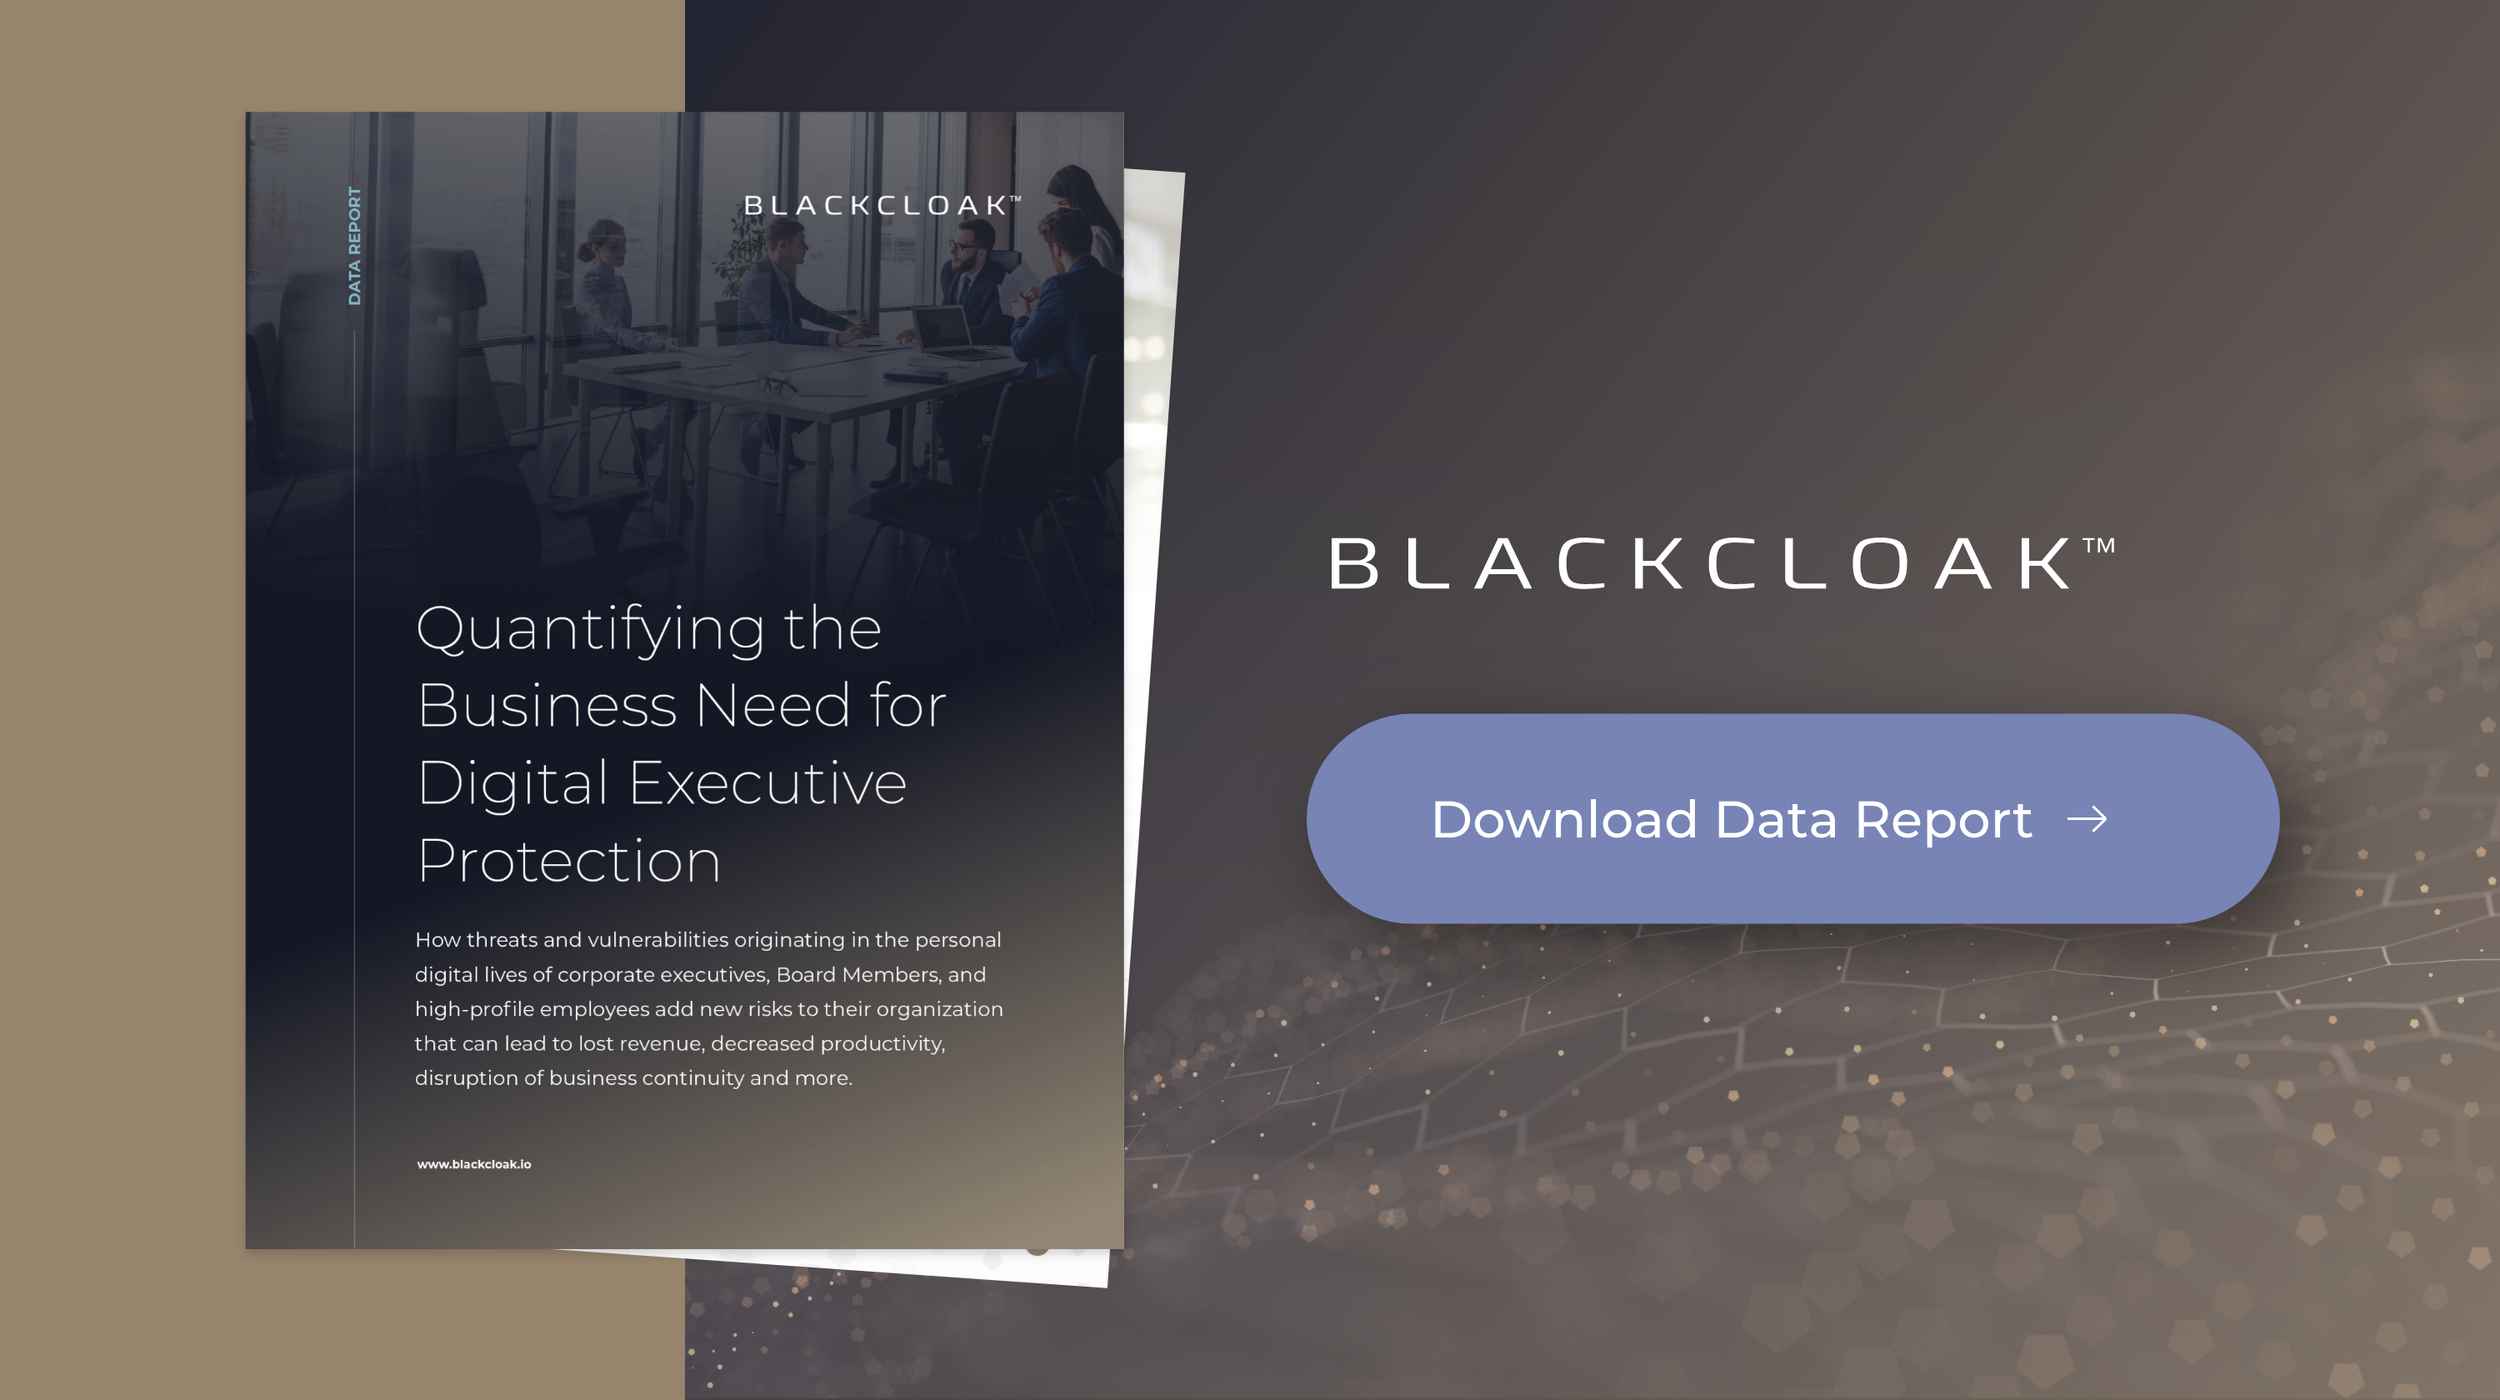 BlackCloak | The Need For Digital Executive Protection